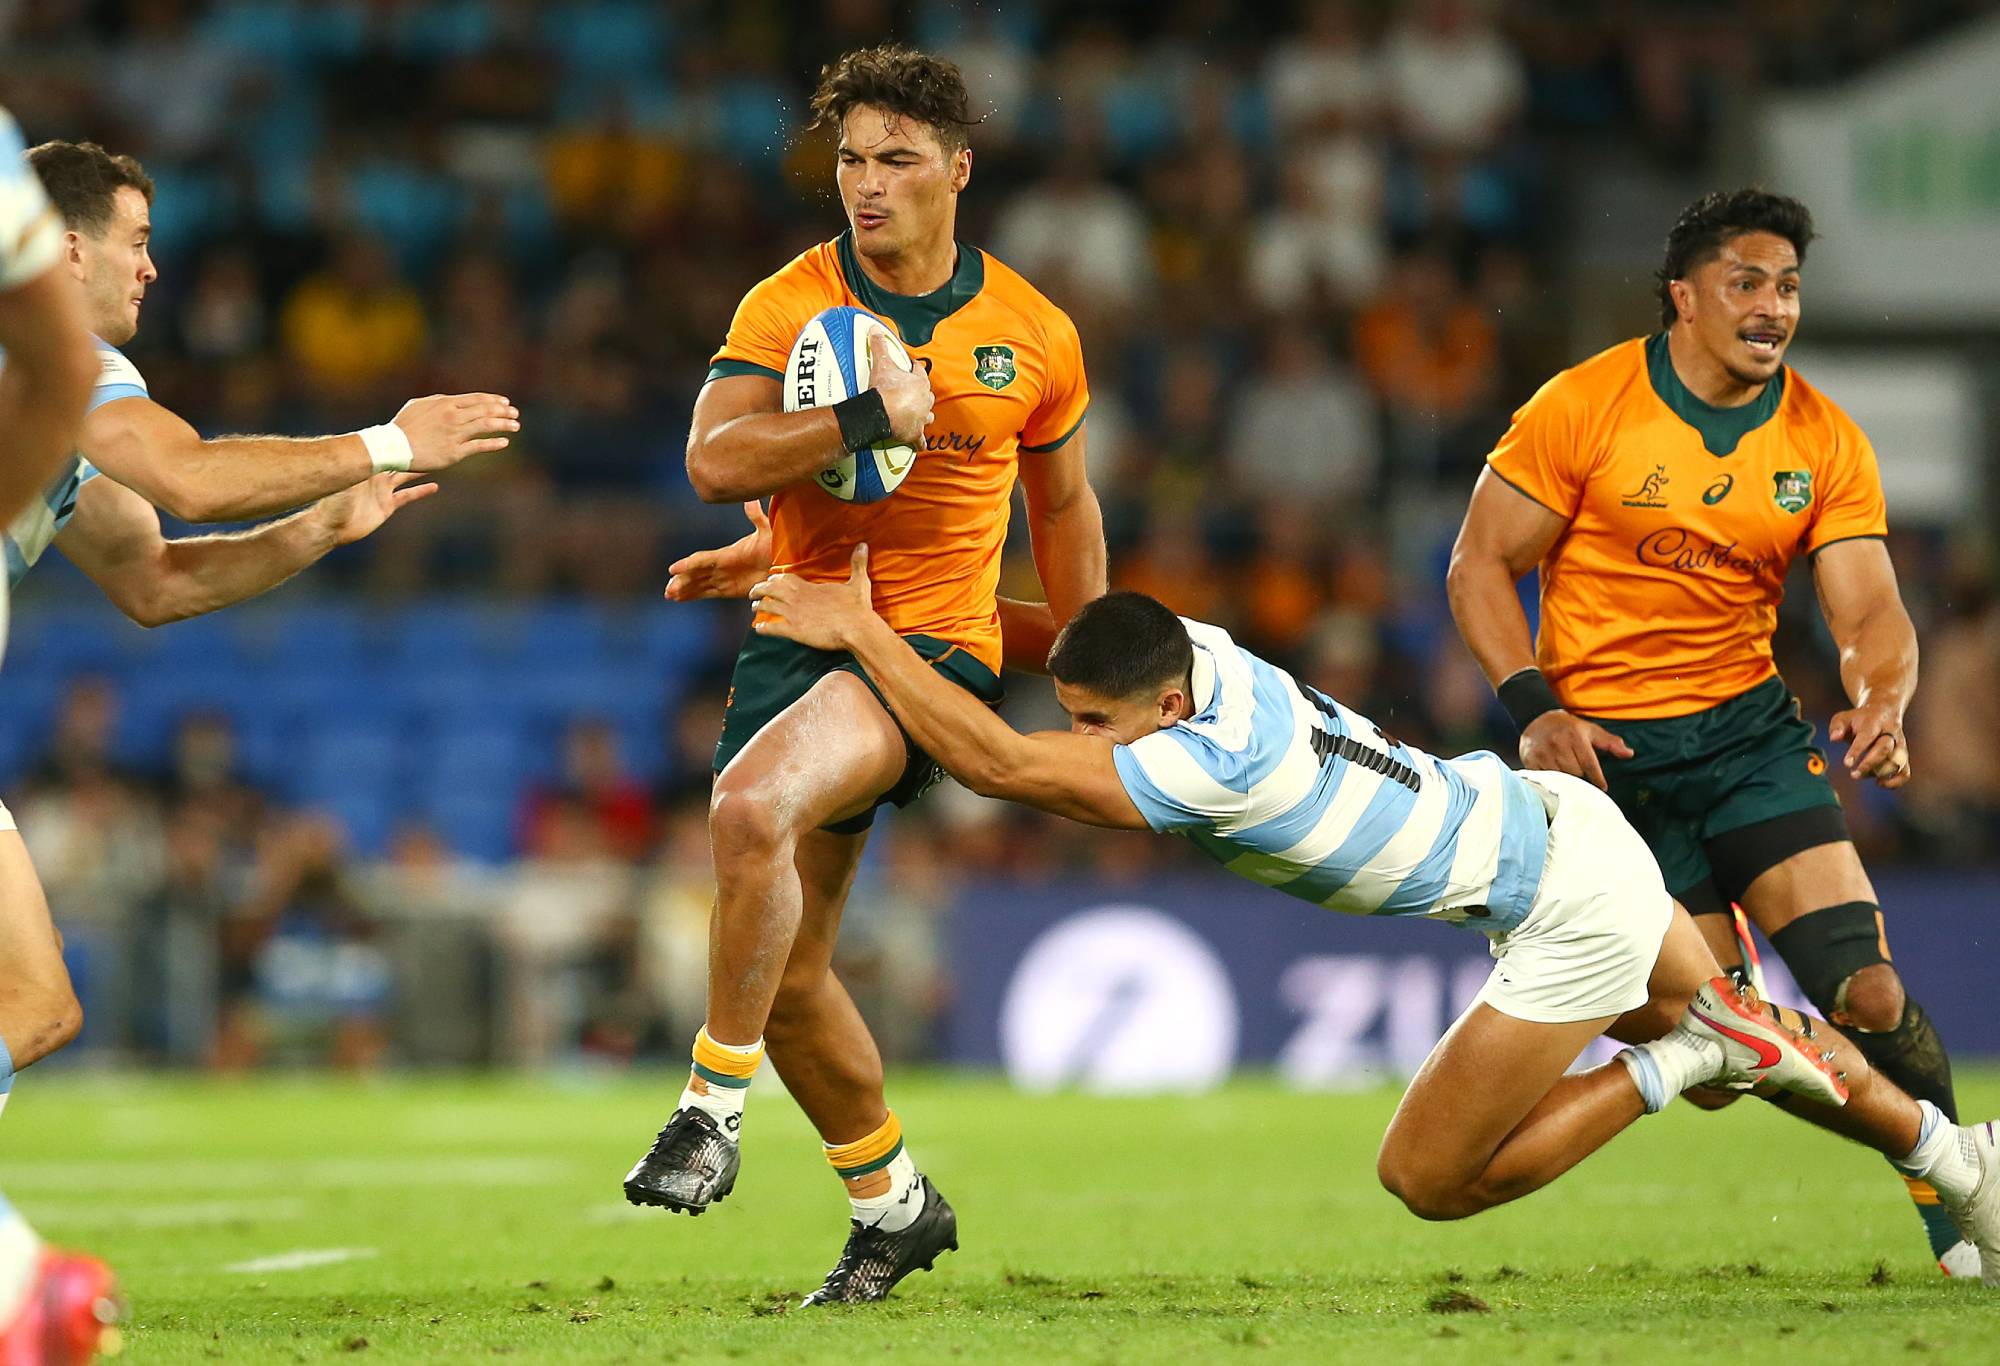 Jordan Petaia of the Wallabies makes a run during The Rugby Championship match between the Argentina Pumas and the Australian Wallabies at Cbus Super Stadium on October 02, 2021 in Gold Coast, Australia. (Photo by Jono Searle/Getty Images)